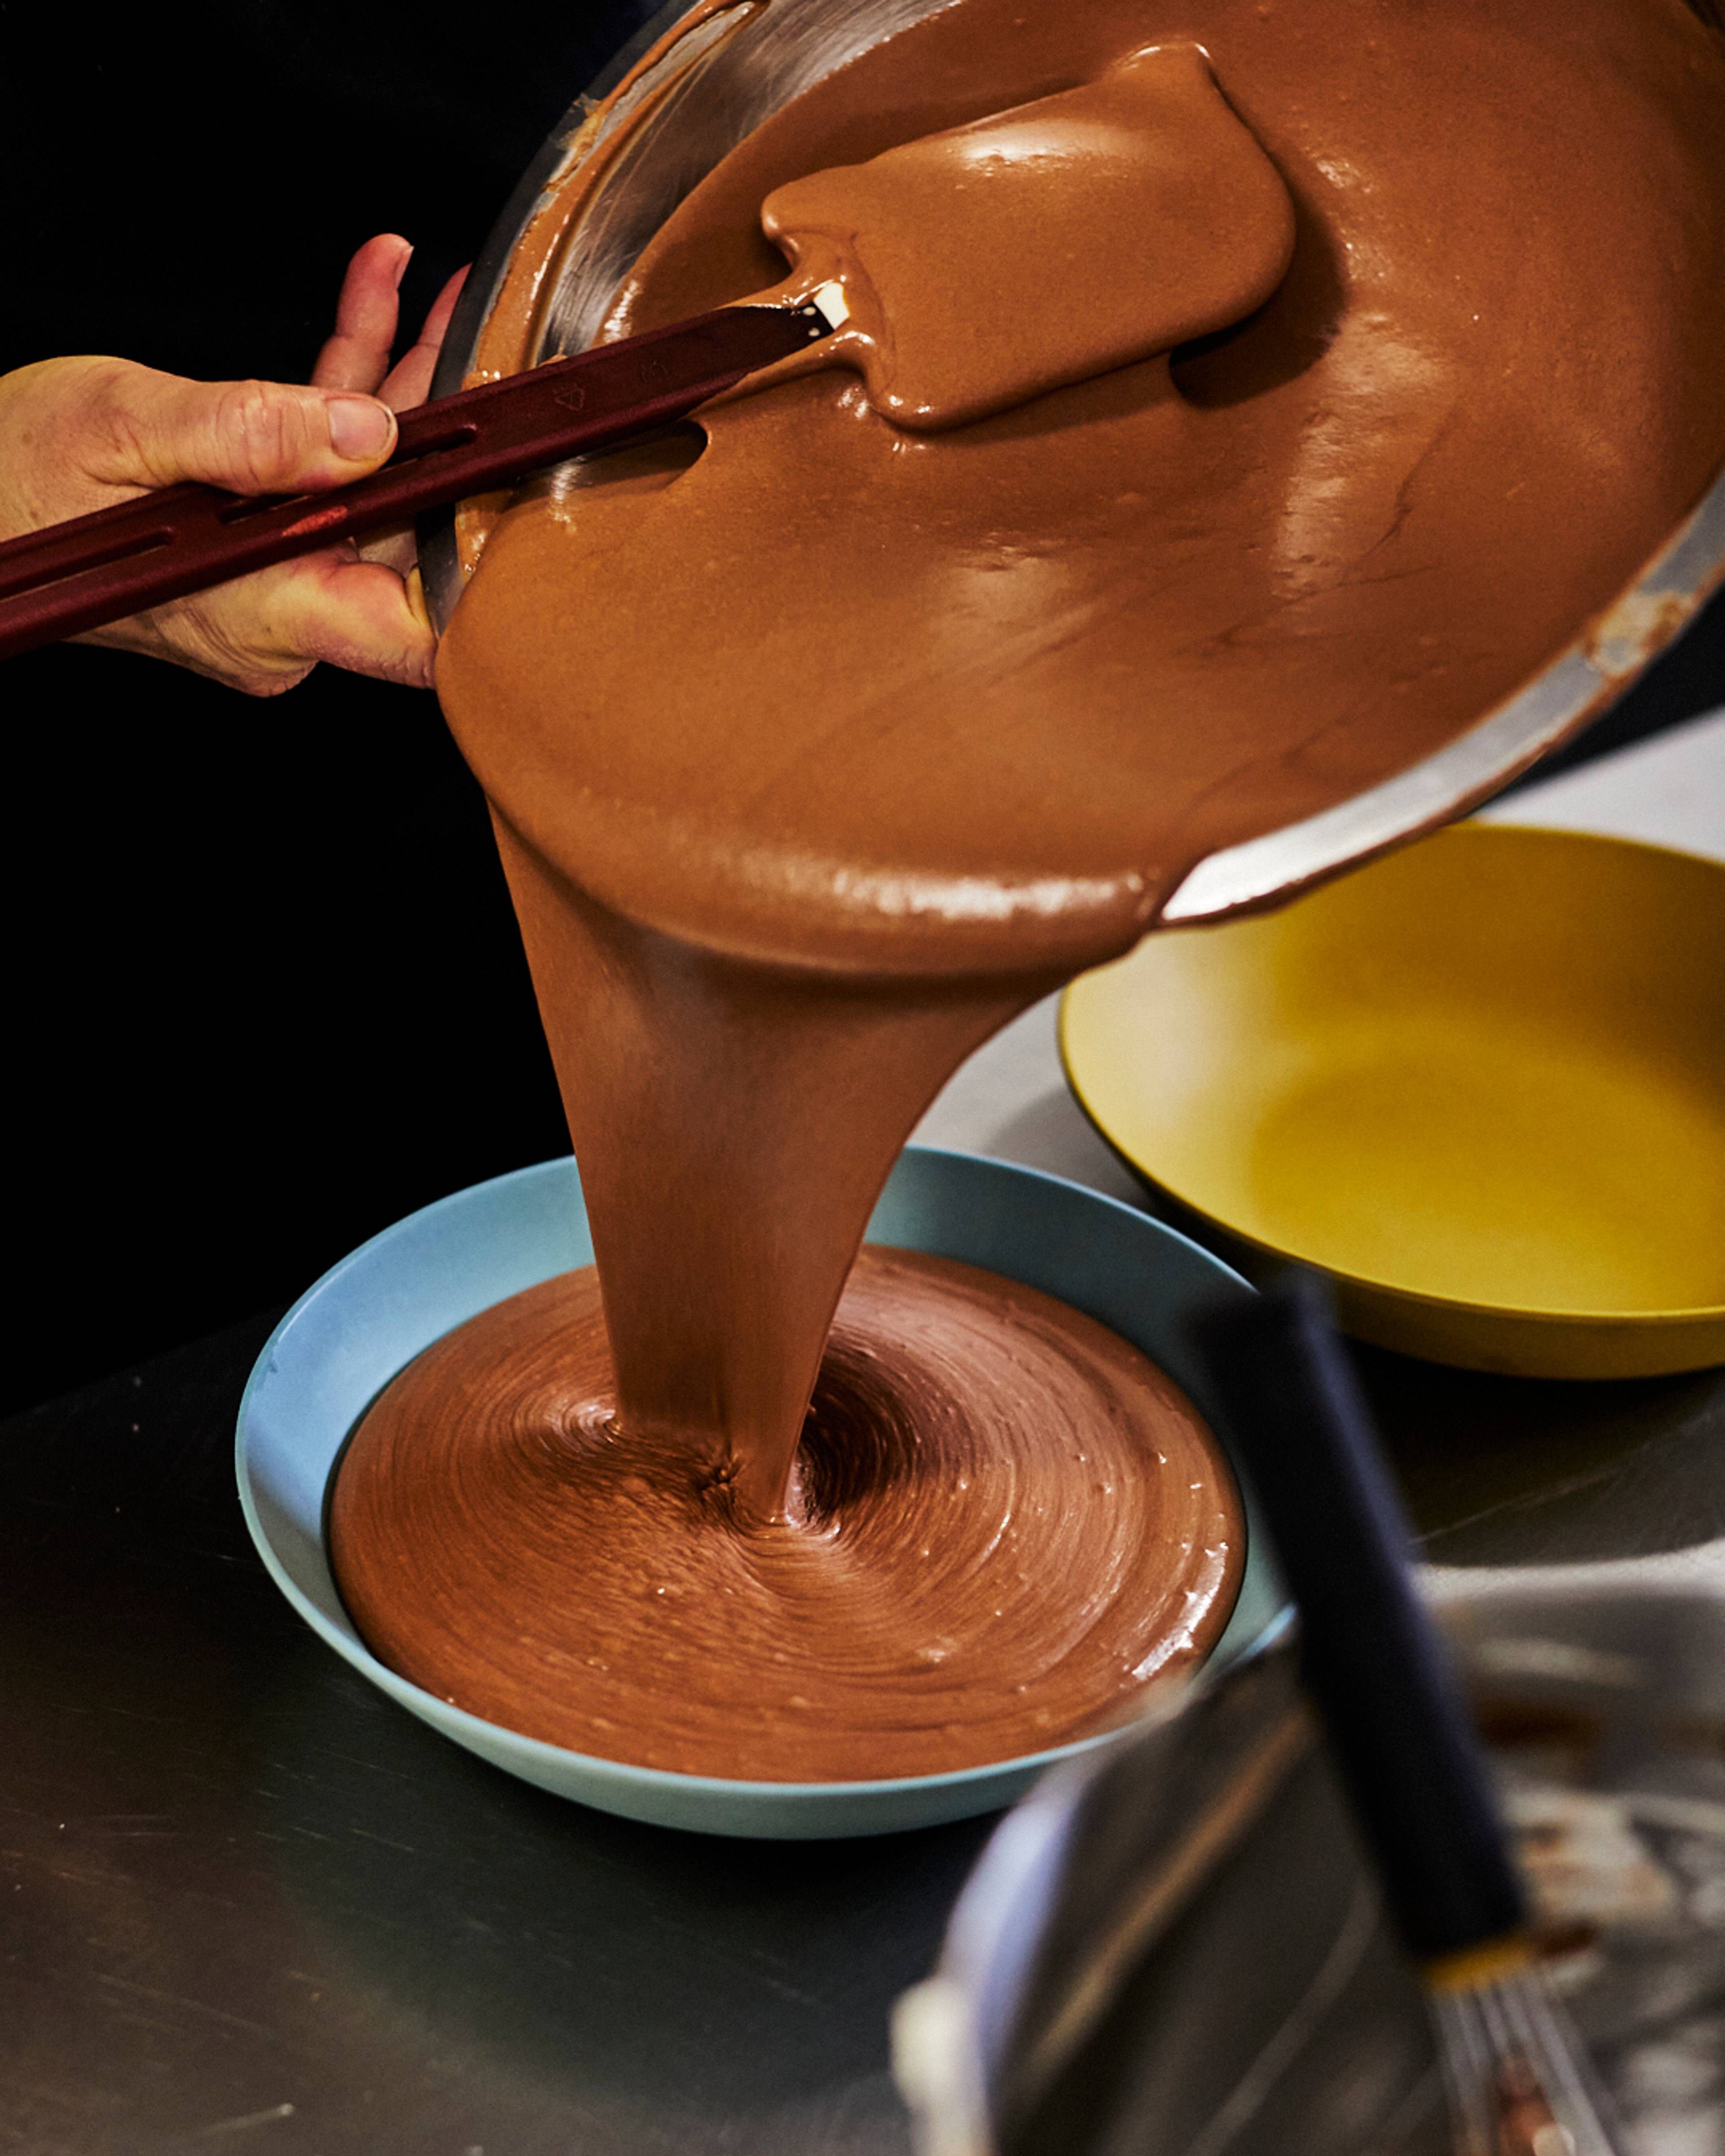 chocolate mousse mix being poured into serving bowl